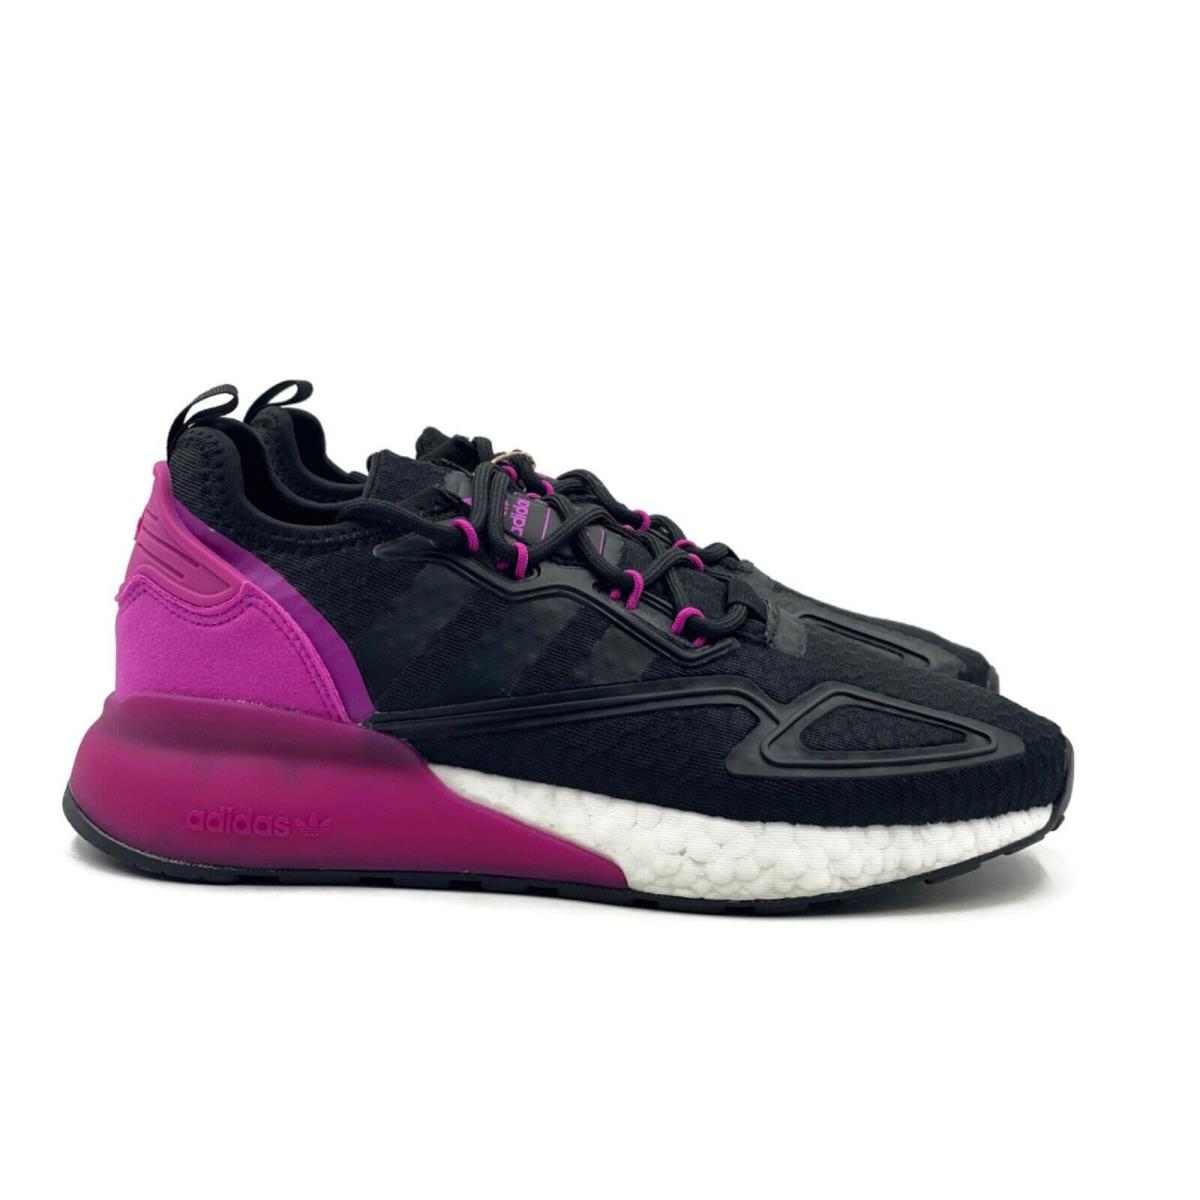 Adidas ZX 2K Boost Women Casual Running Shoe Black Pink Athletic Trainer Sneaker